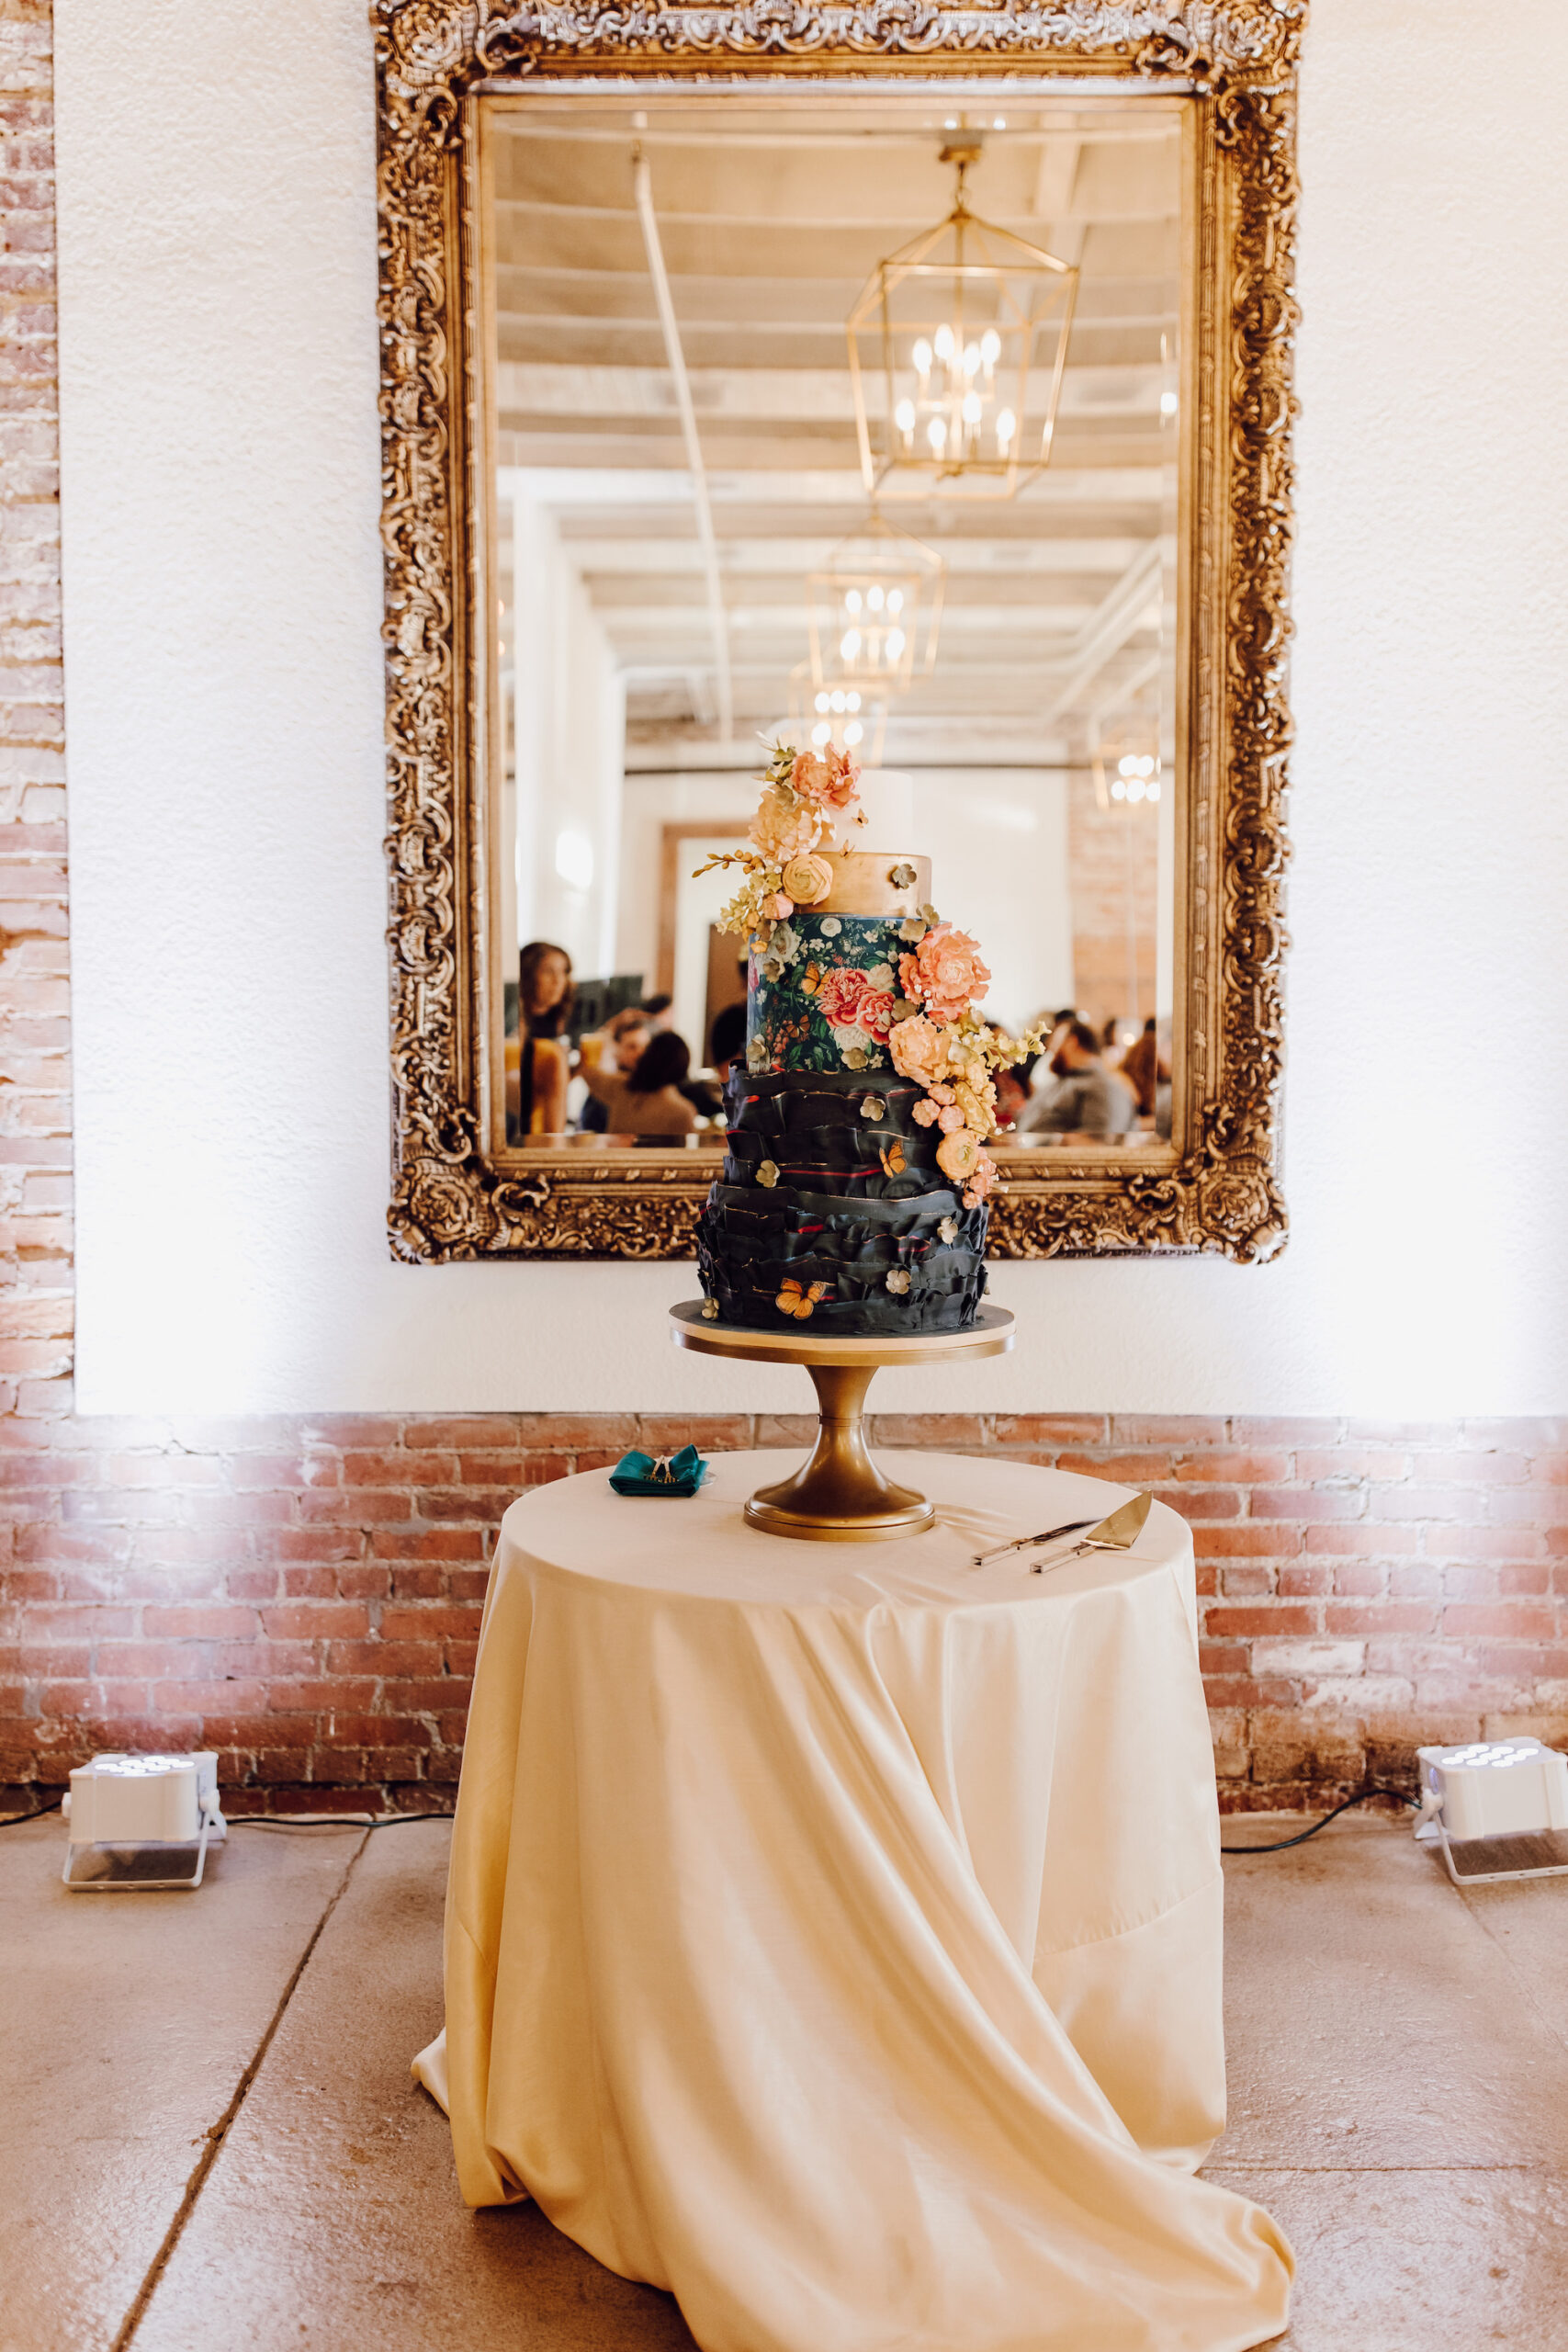 Whimsical Four-tiered Wedding Cake with Black Fondant and Edible Flowers Ideas